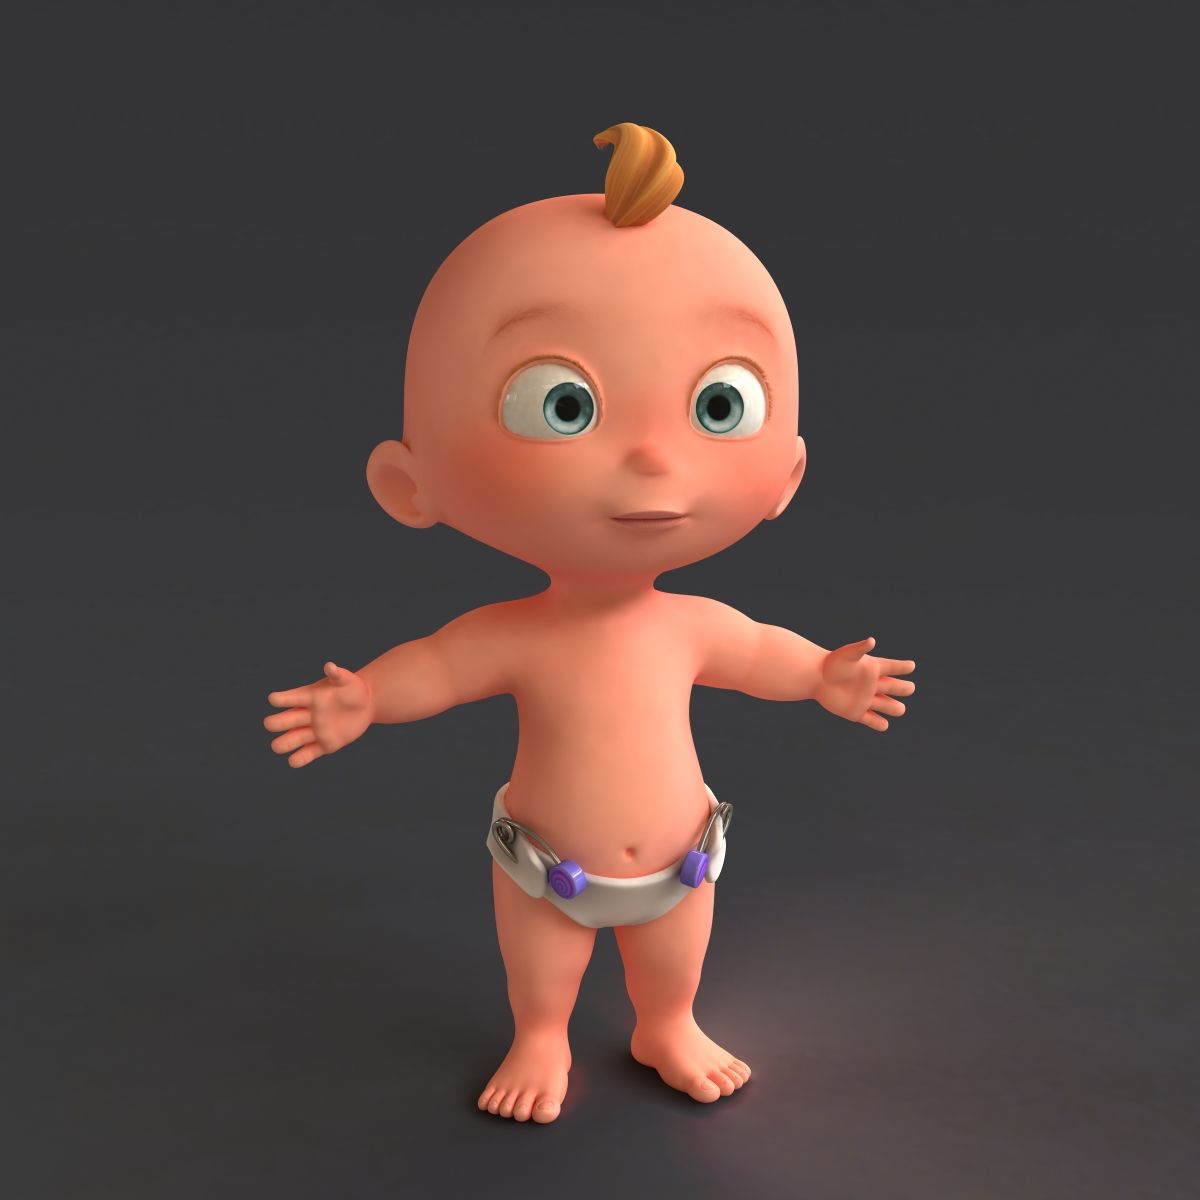 I will Unique 3D Cartoonist or Realistic character design with Rigging based on your reference image